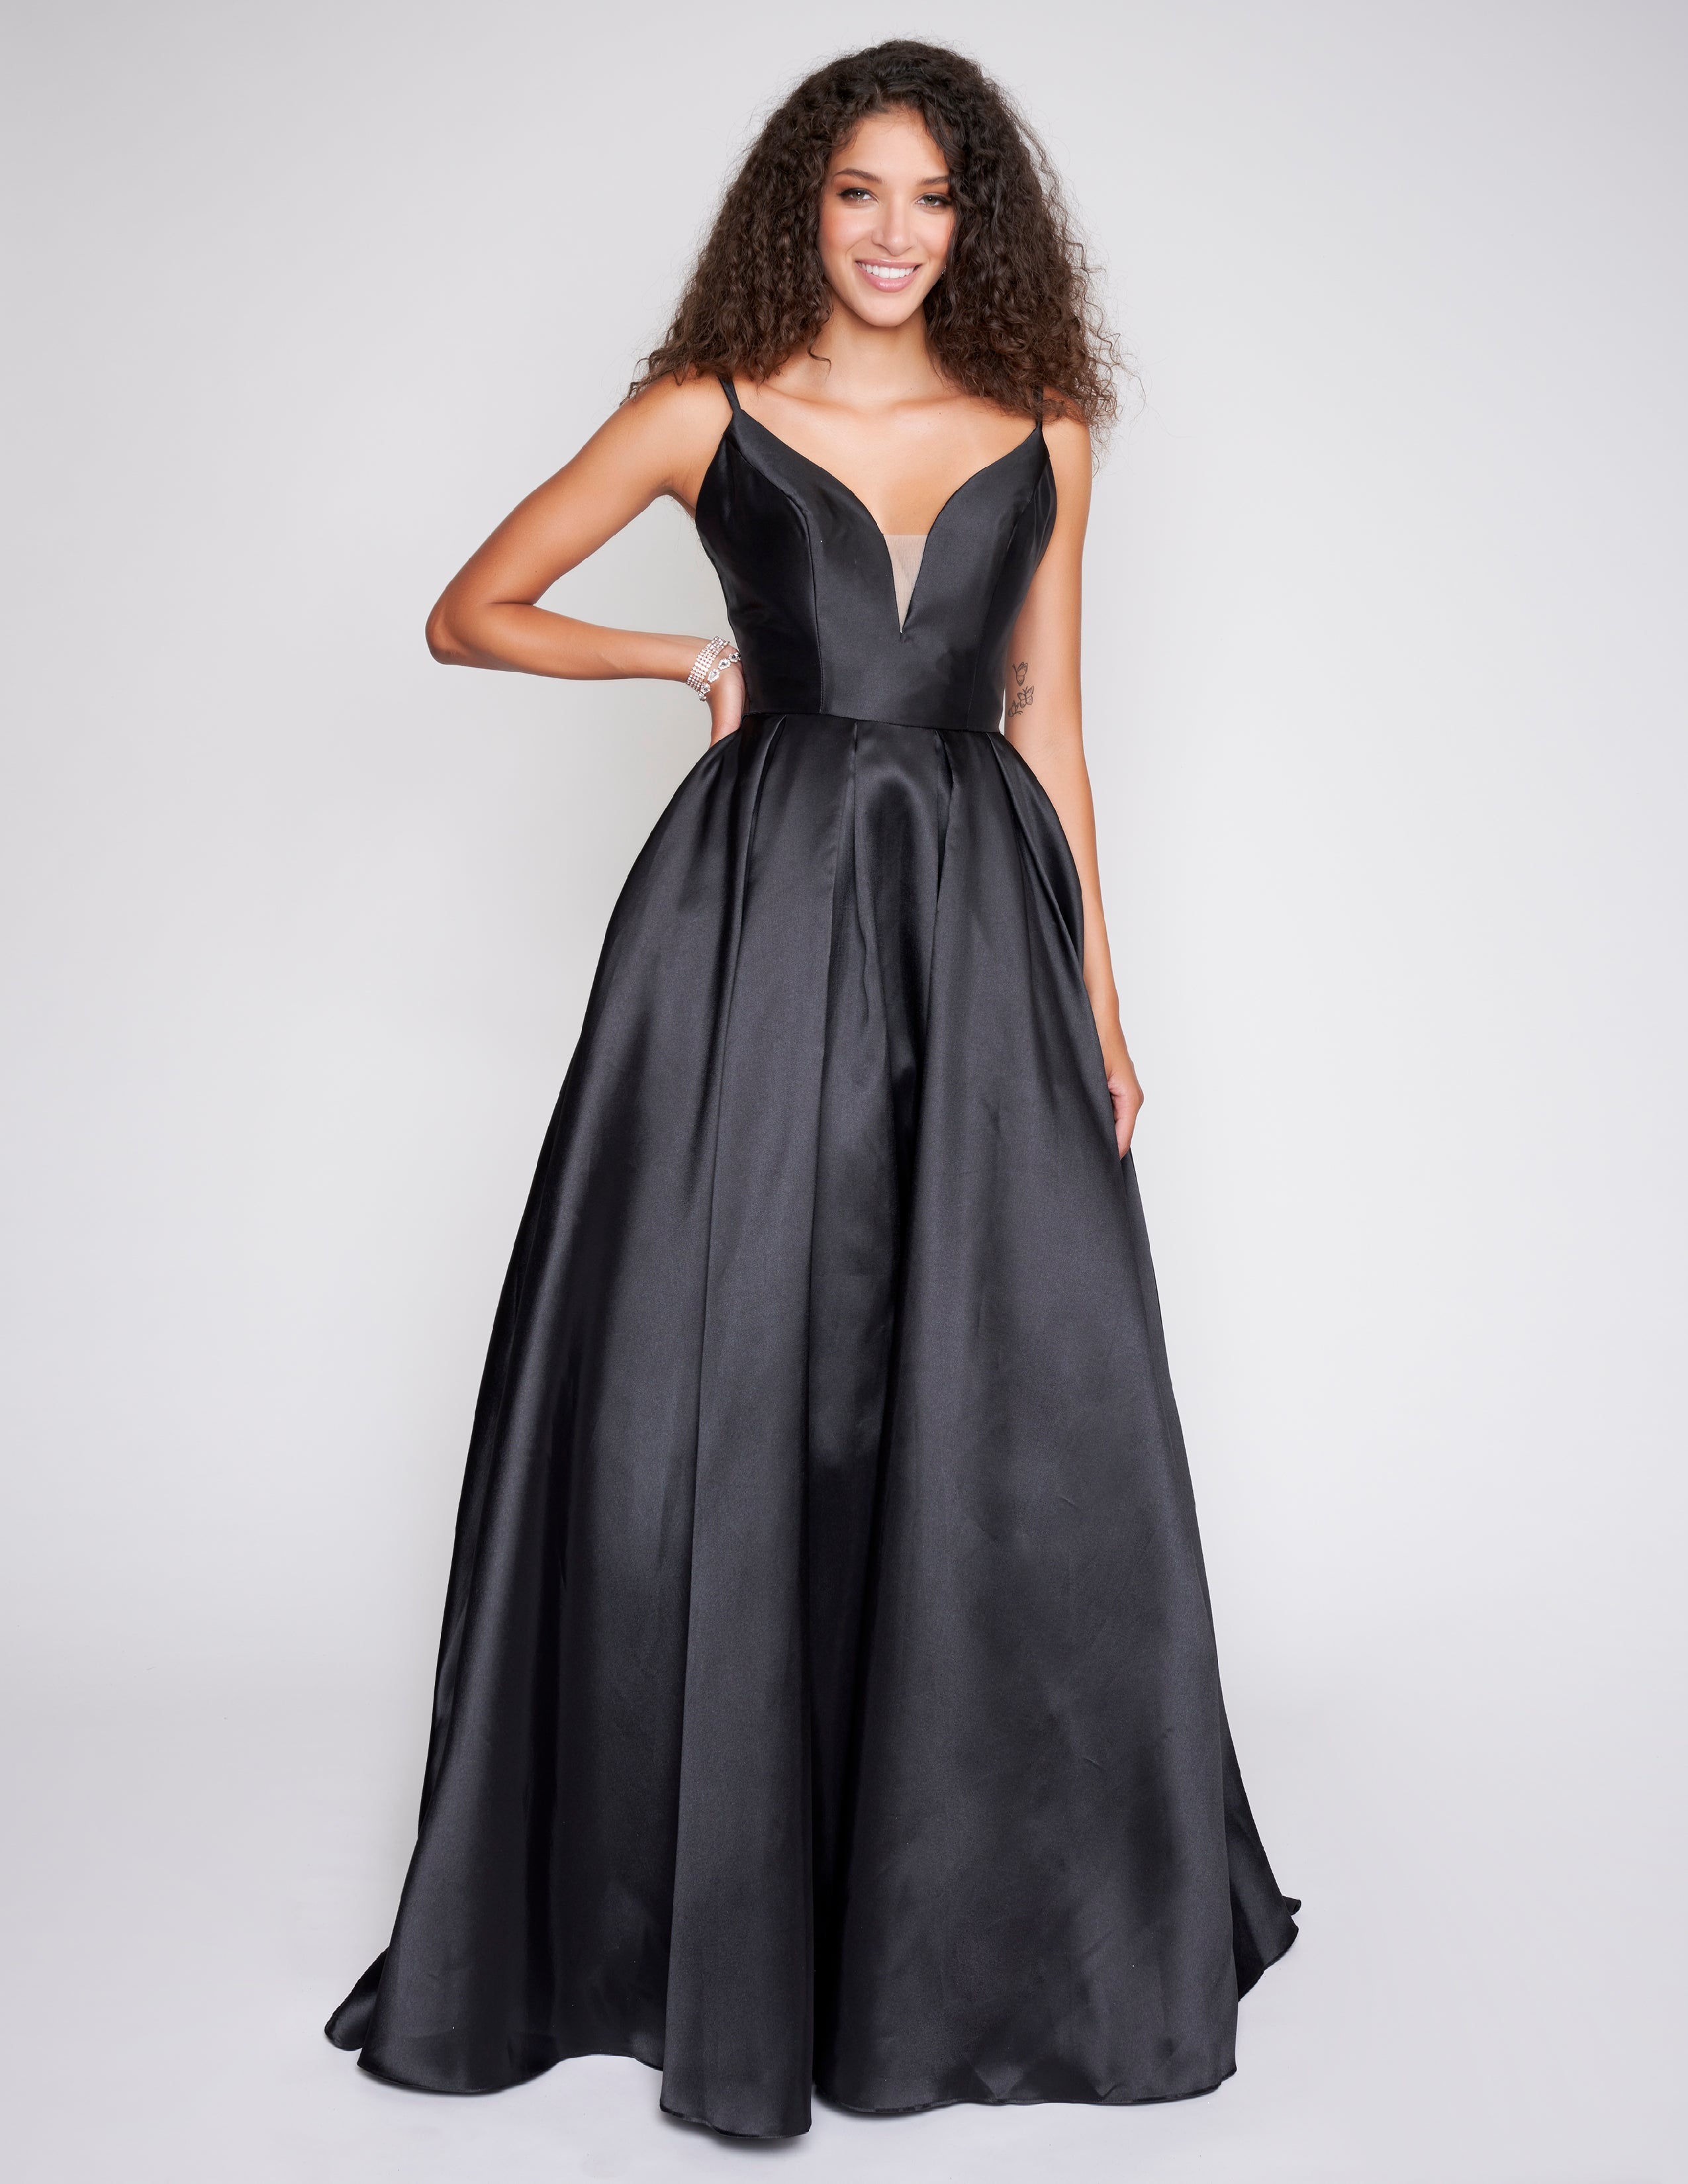 Charming Off Shoulder Black Appliques Green Satin Ball Gown Prom Gown –  AlineBridal